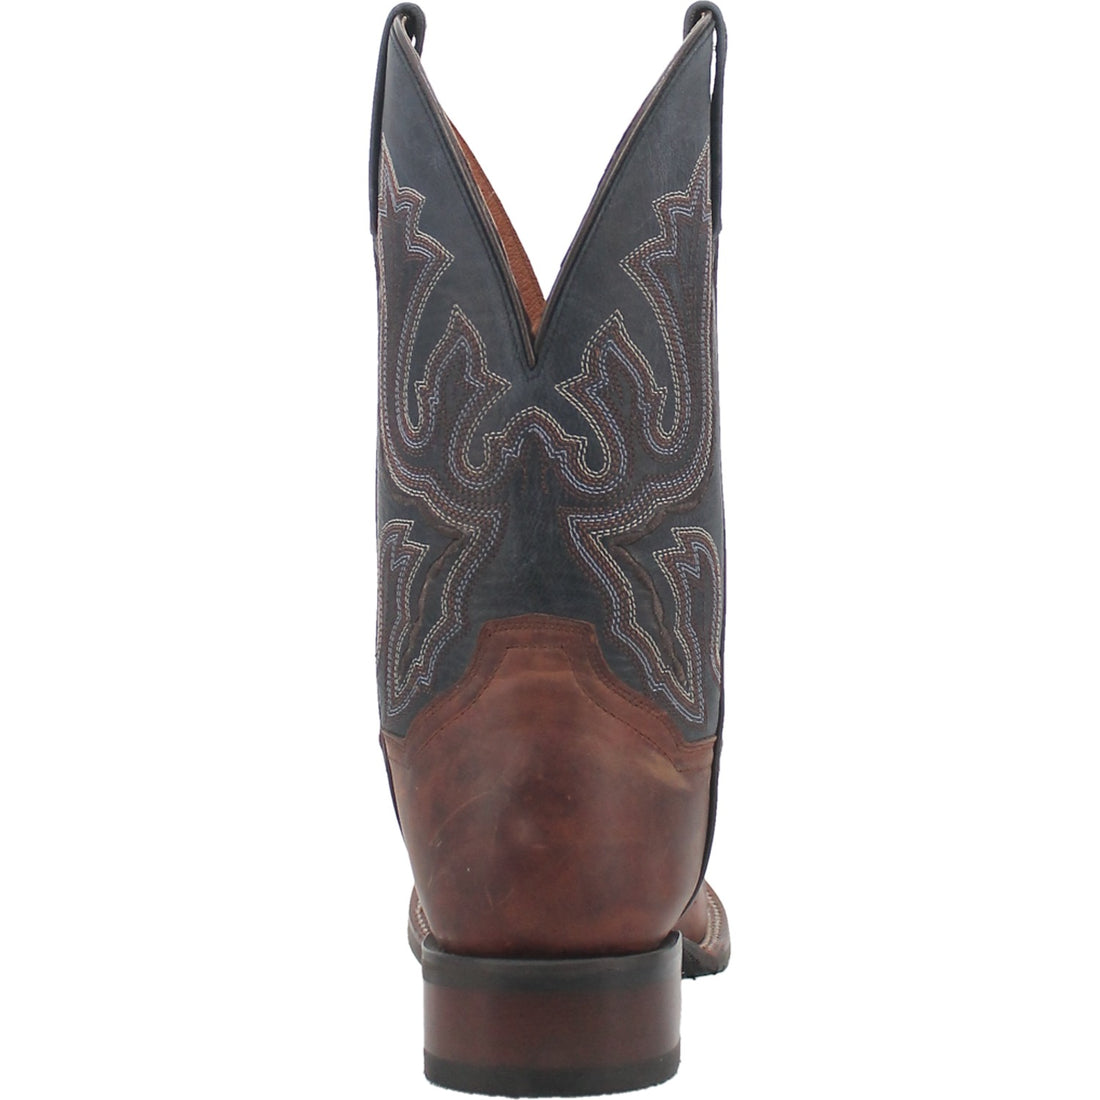 WINSLOW LEATHER BOOT